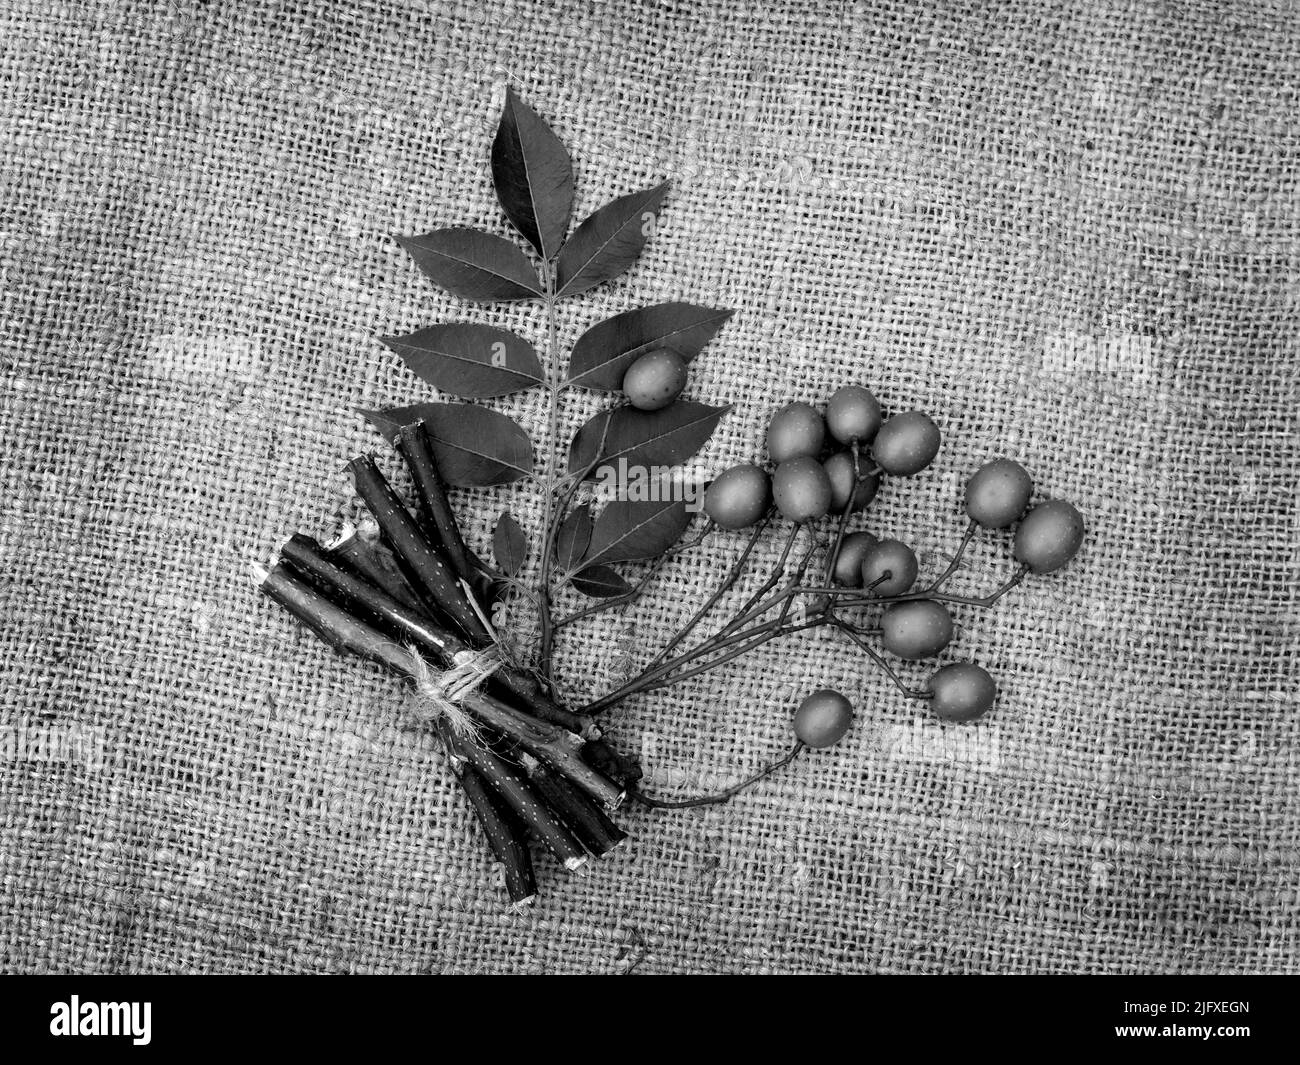 Neem leaves,  fruits, and stems on jute fabric background. Medicinal neem seeds, leaf, branches for homeopathy, ayurveda traditional raw material Stock Photo